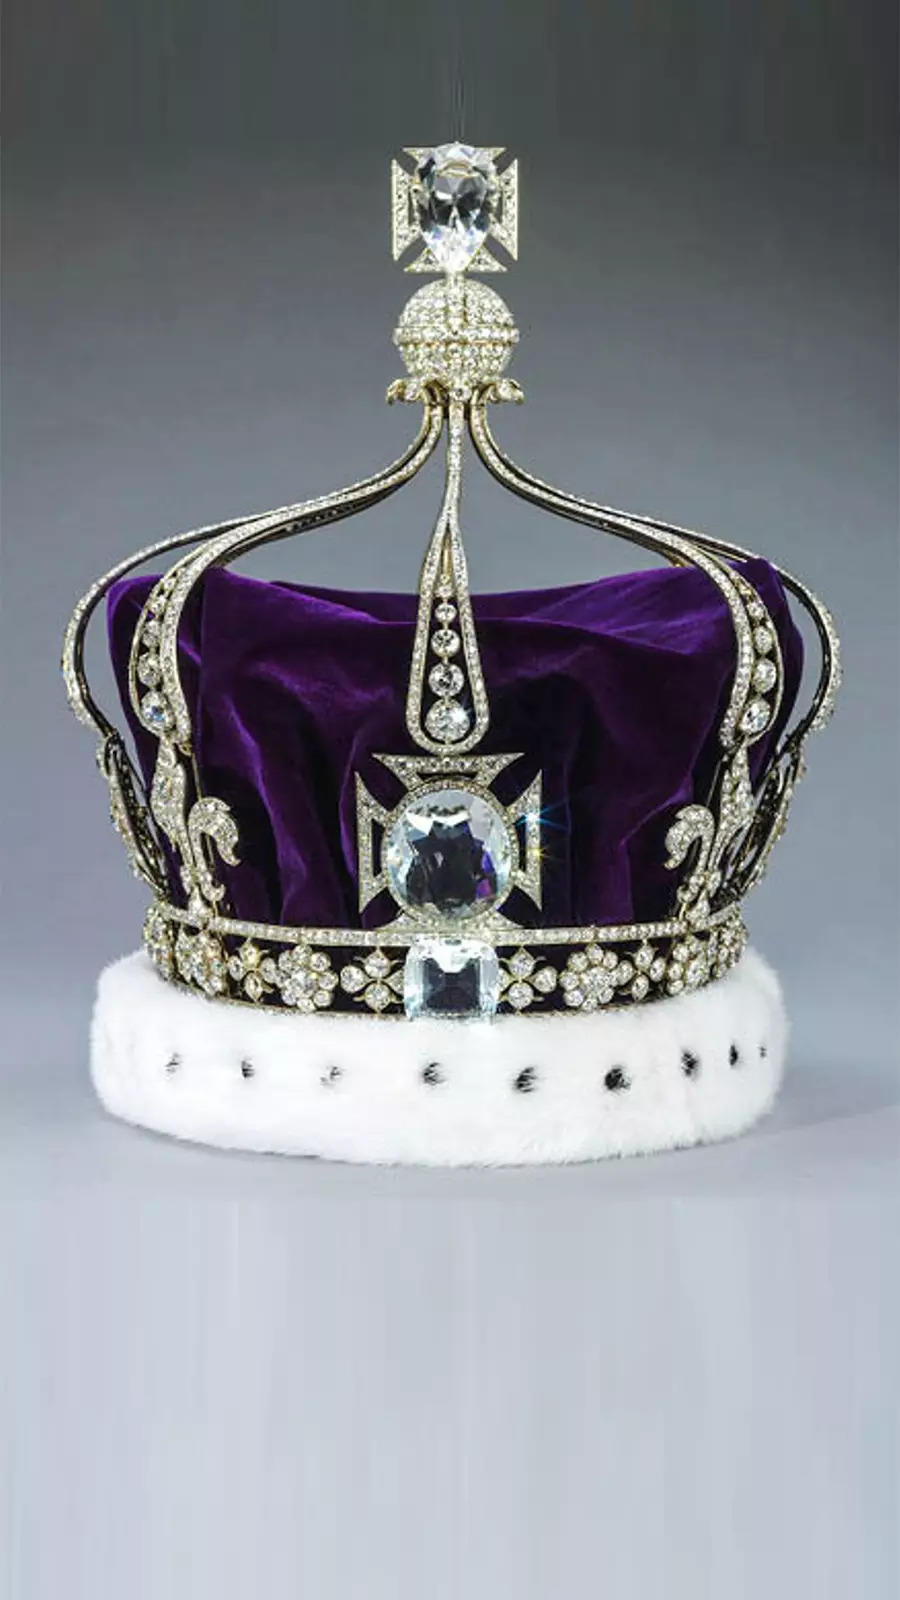 7 Lesser-known Facts About the Kohinoor Diamond